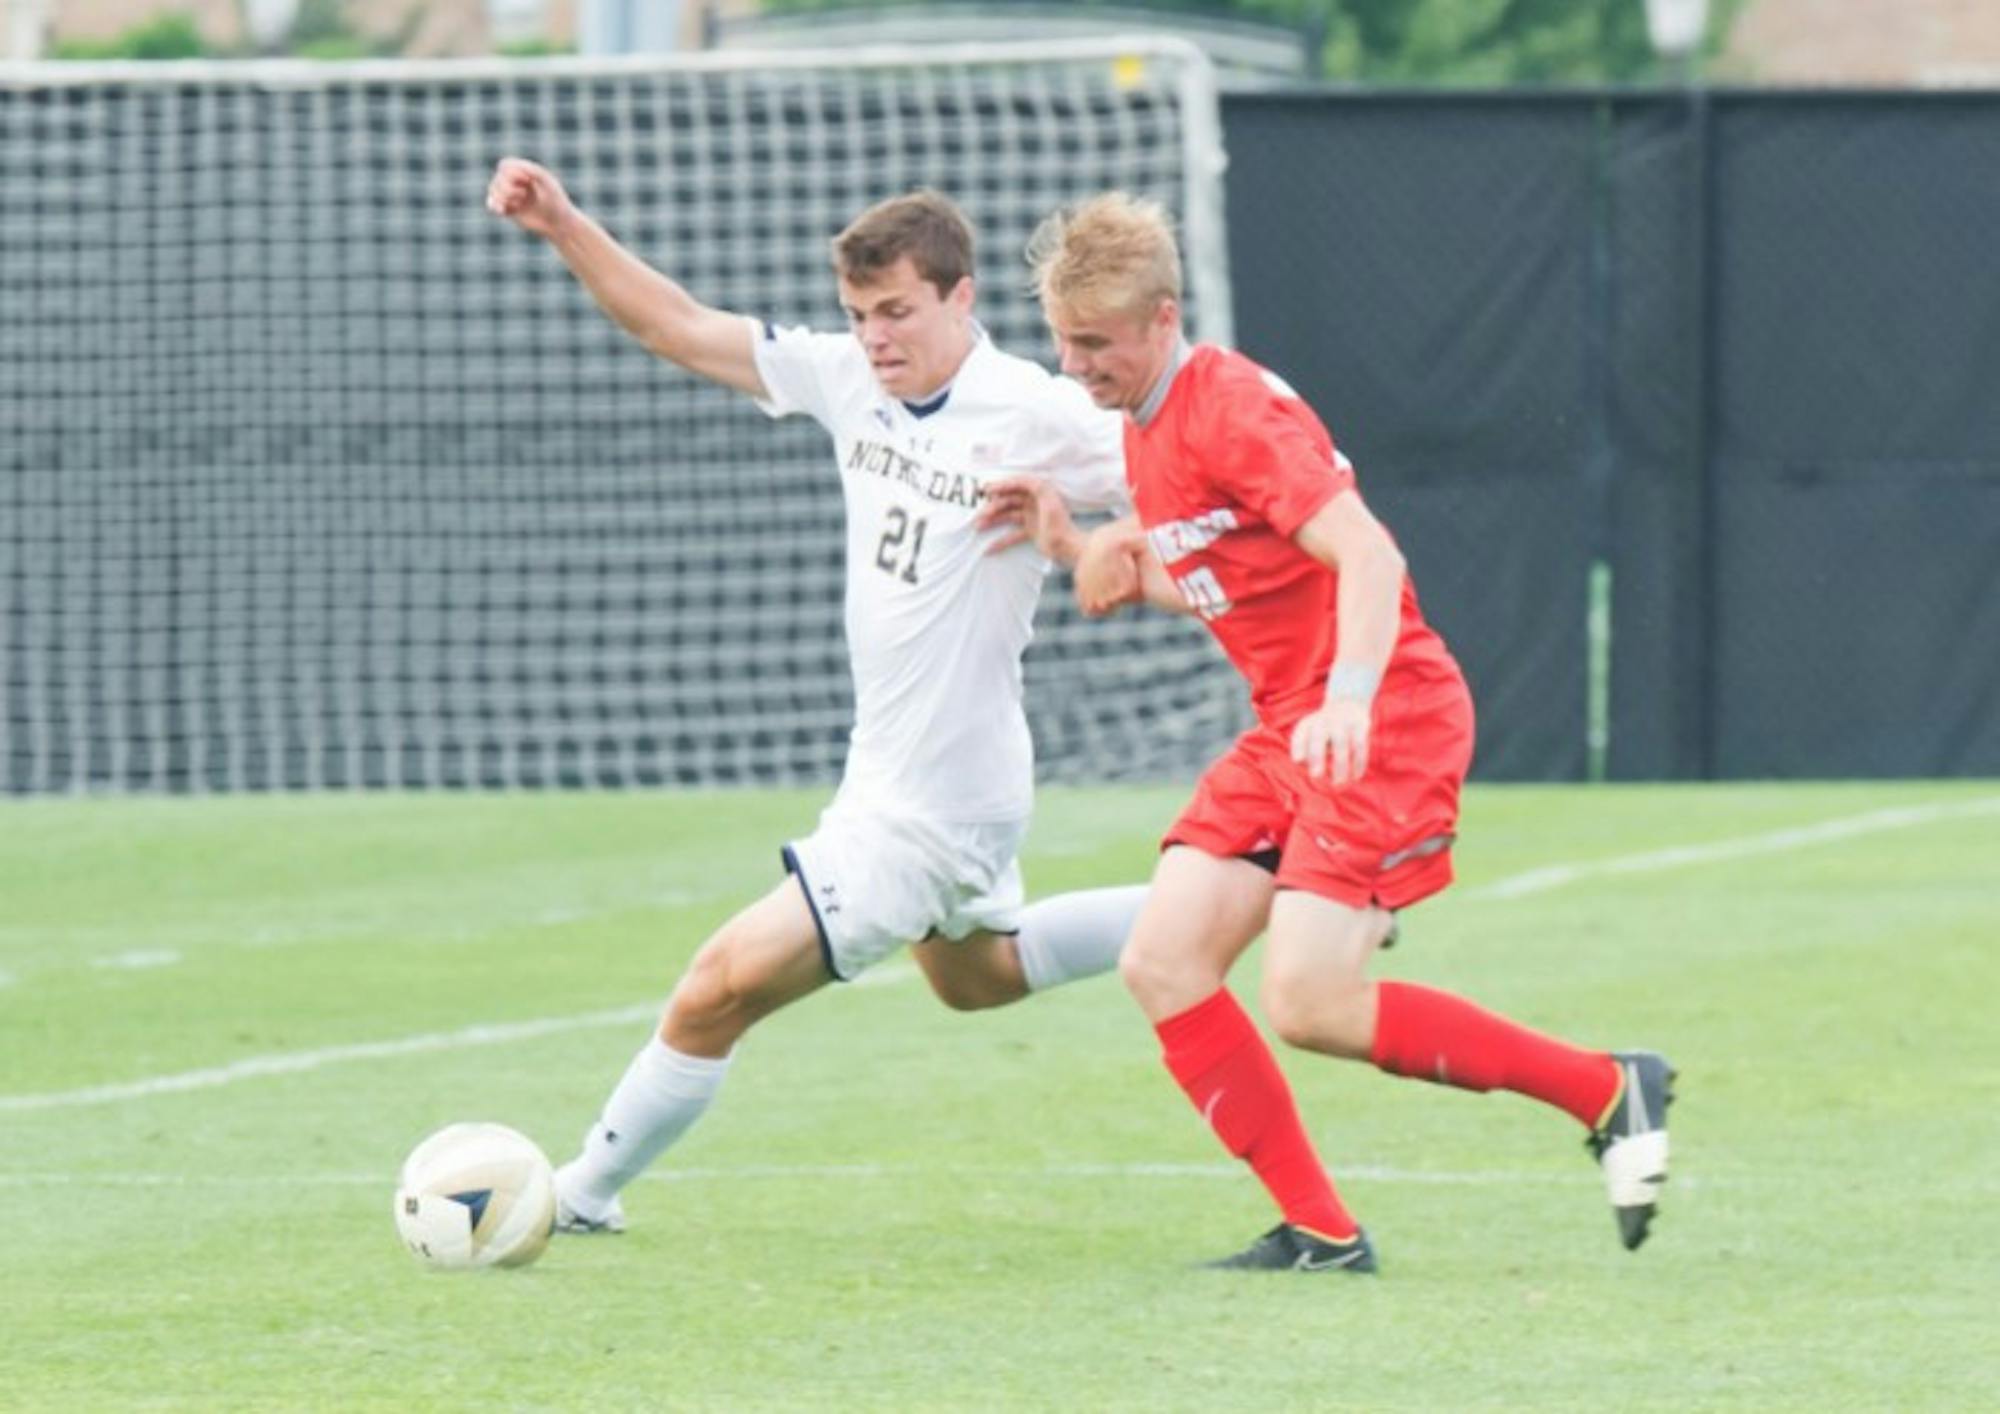 Irish sophomore midfielder Thomas Ueland attempts to dribble around a defender during Notre Dame’s 1-0 win over New Mexico.